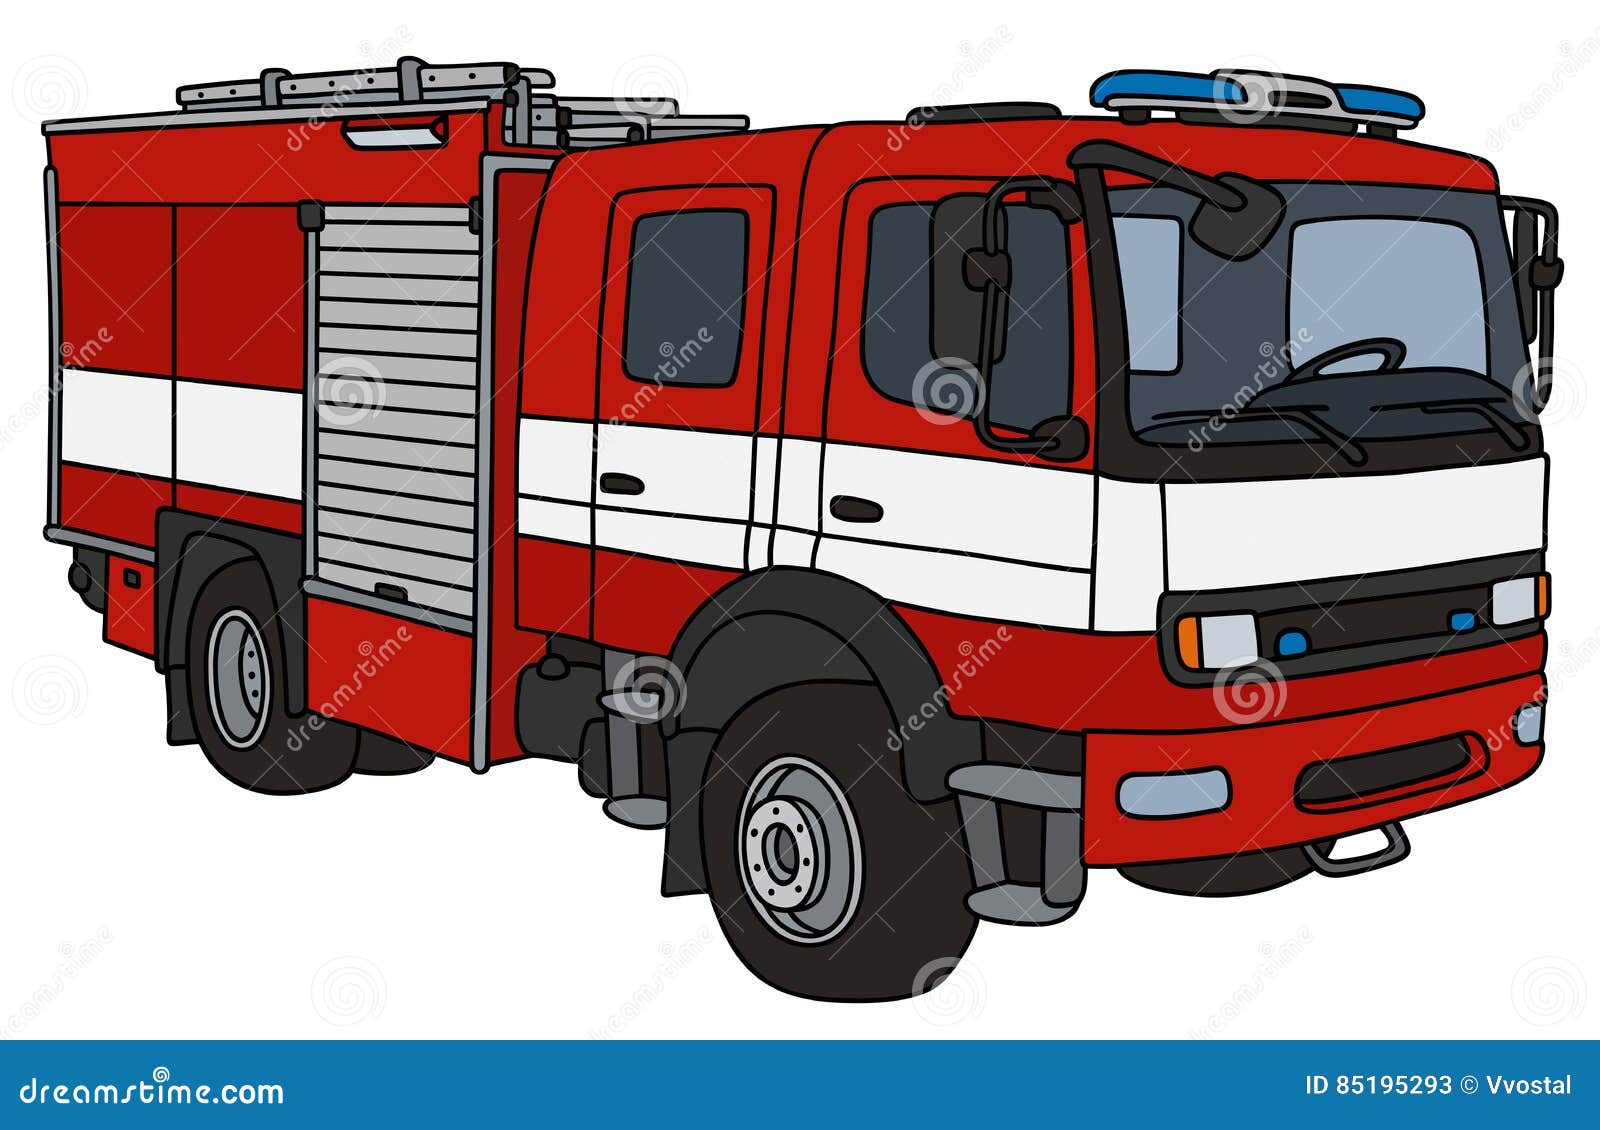 How To Draw Fire Truck In Simple And Easy Steps Guide